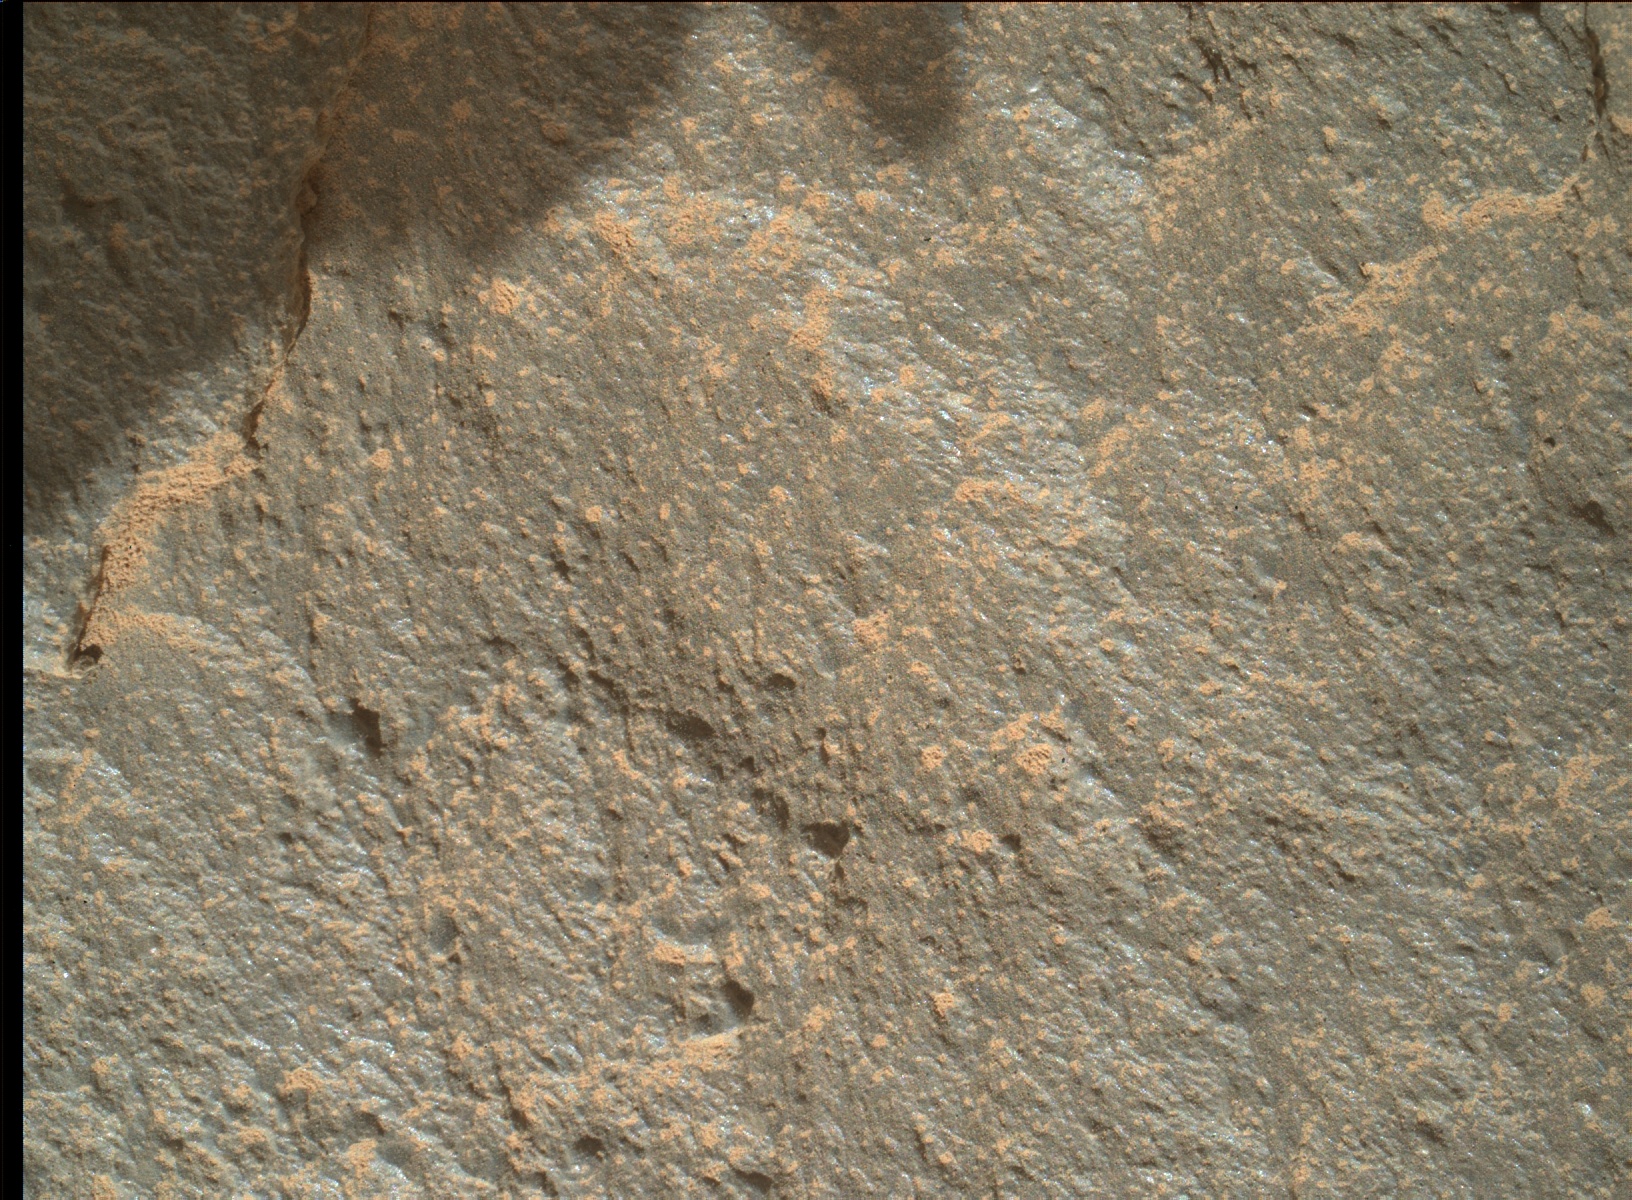 Nasa's Mars rover Curiosity acquired this image using its Mars Hand Lens Imager (MAHLI) on Sol 1102